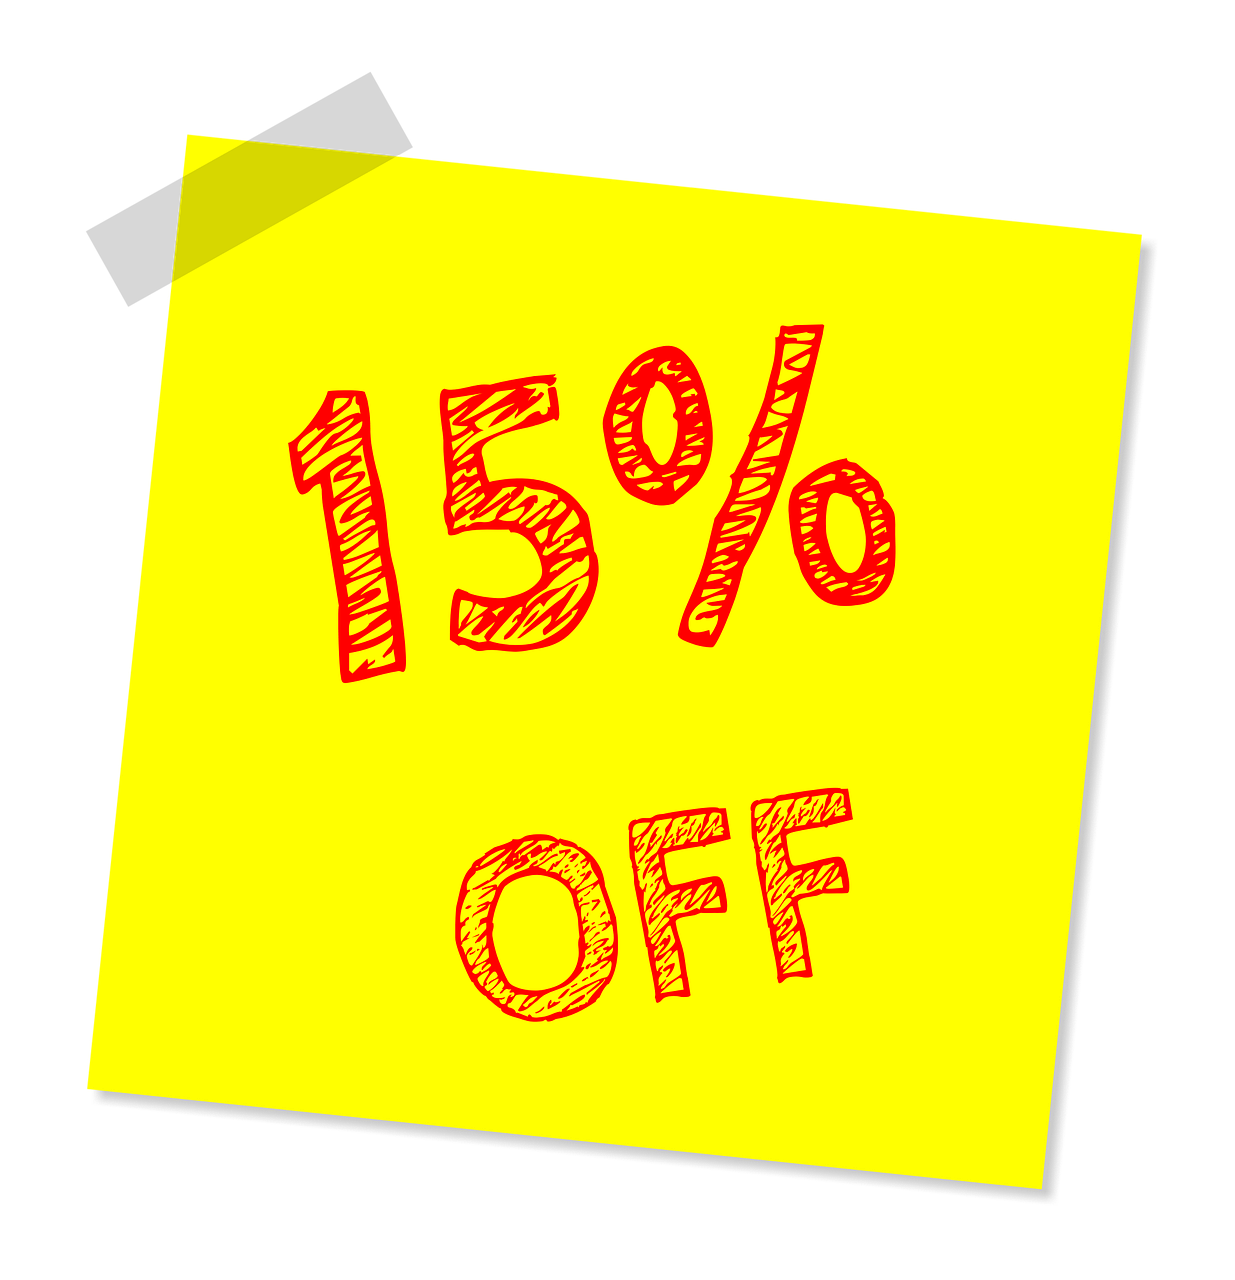 fifteen percent off discount sale free photo